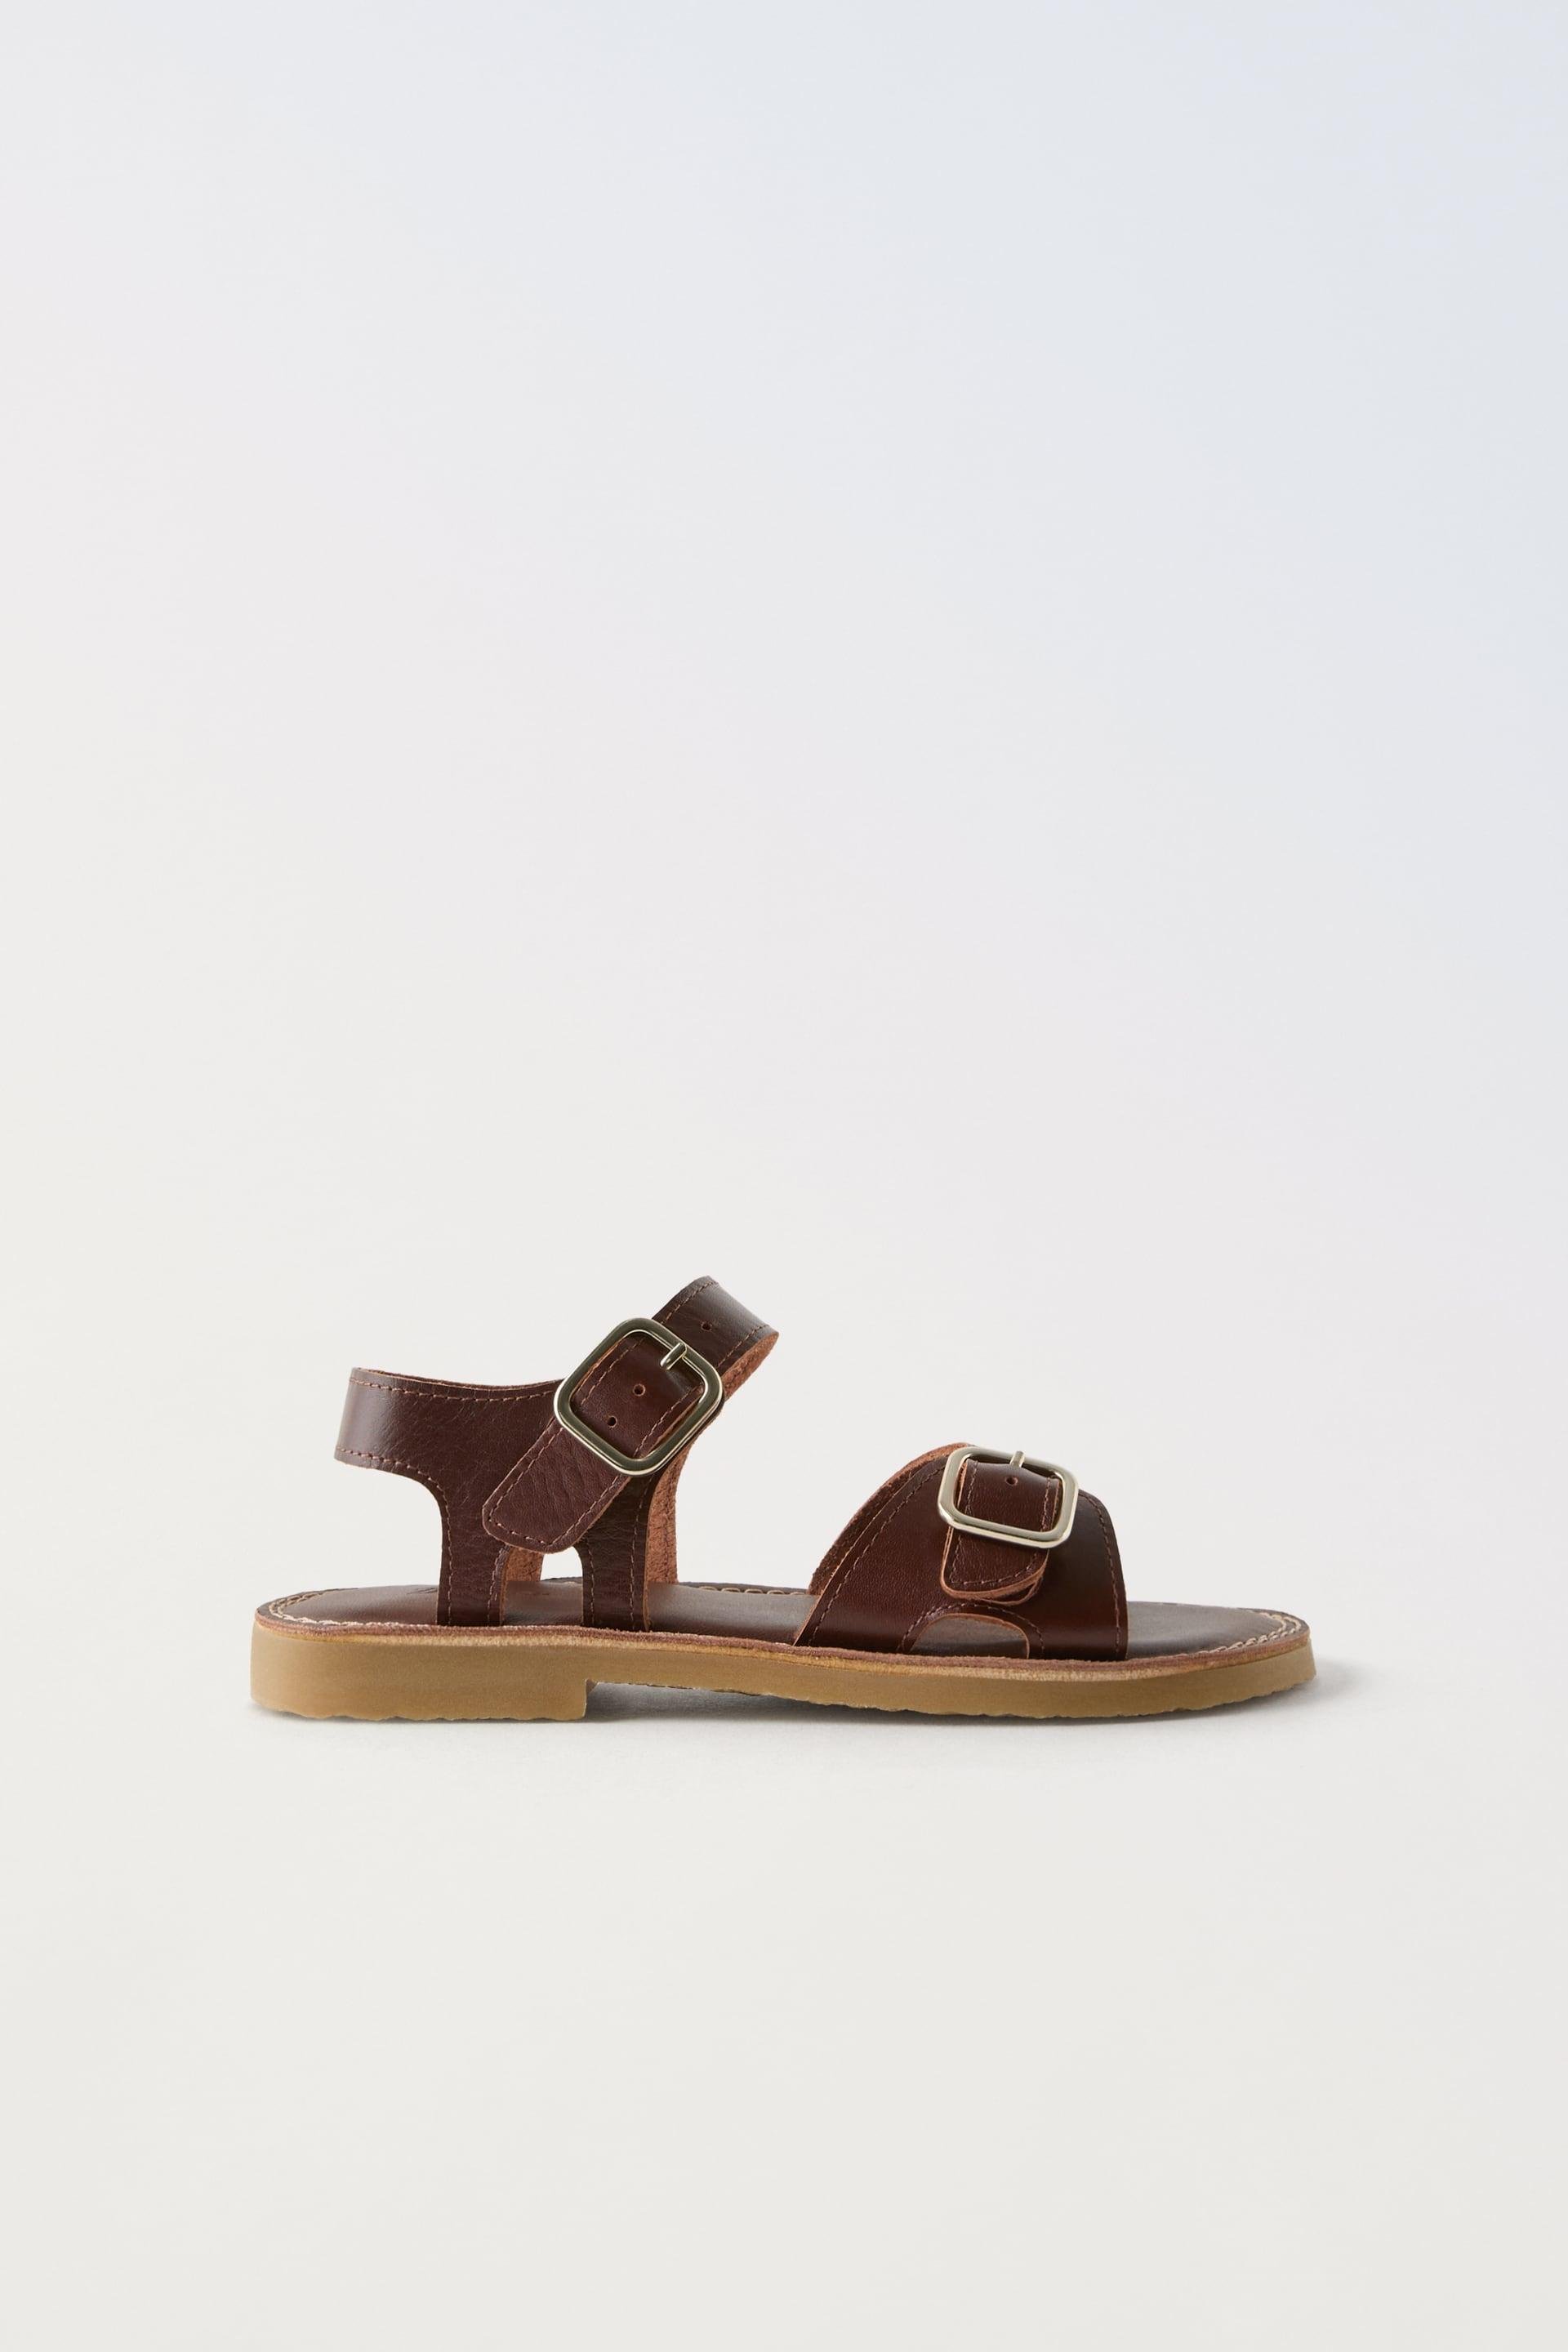 LEATHER SANDALS by ZARA